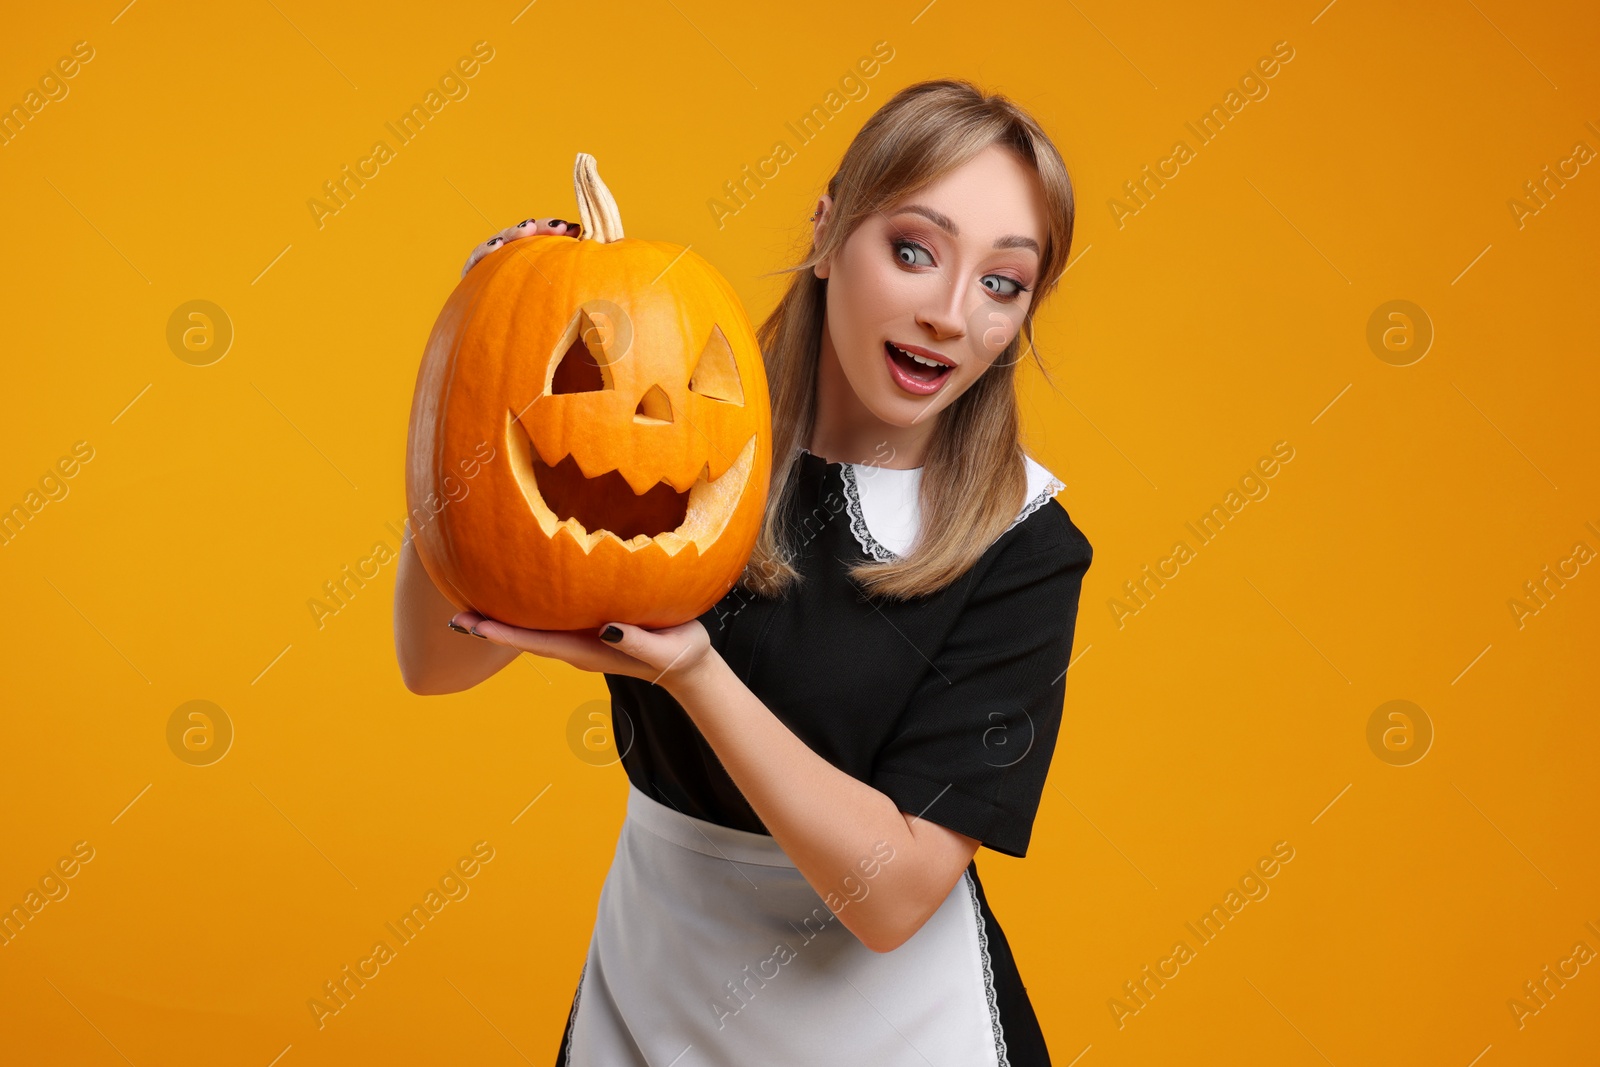 Photo of Emotional woman in scary maid costume with carved pumpkin on orange background. Halloween celebration